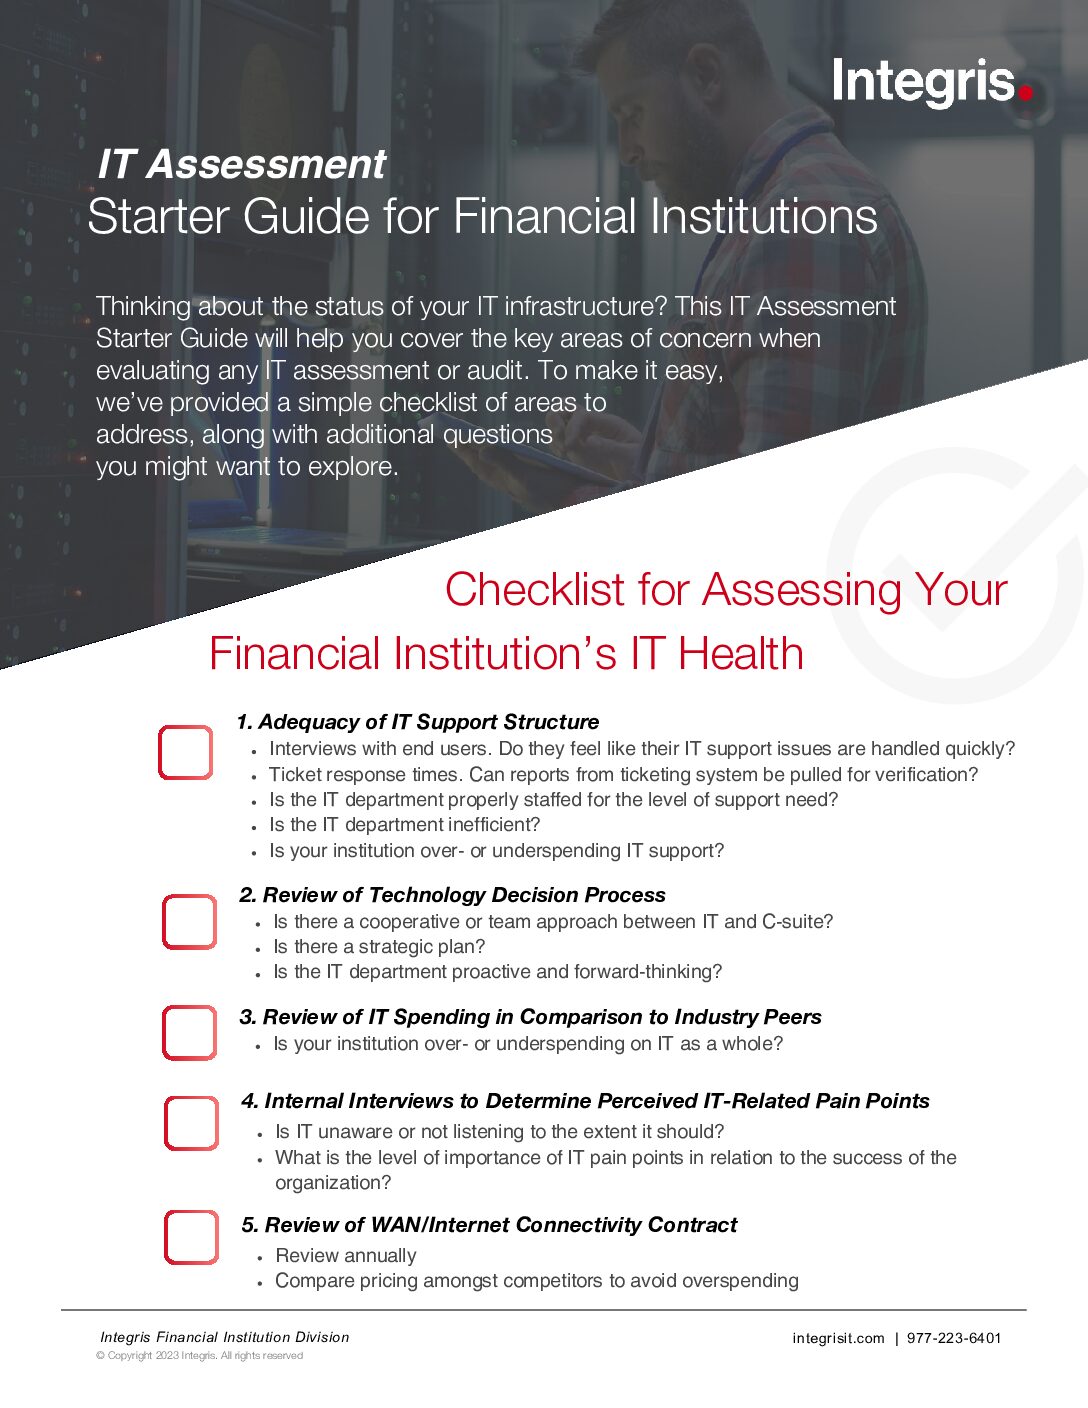 IT Assessment Starter Guide for Financial Institutions